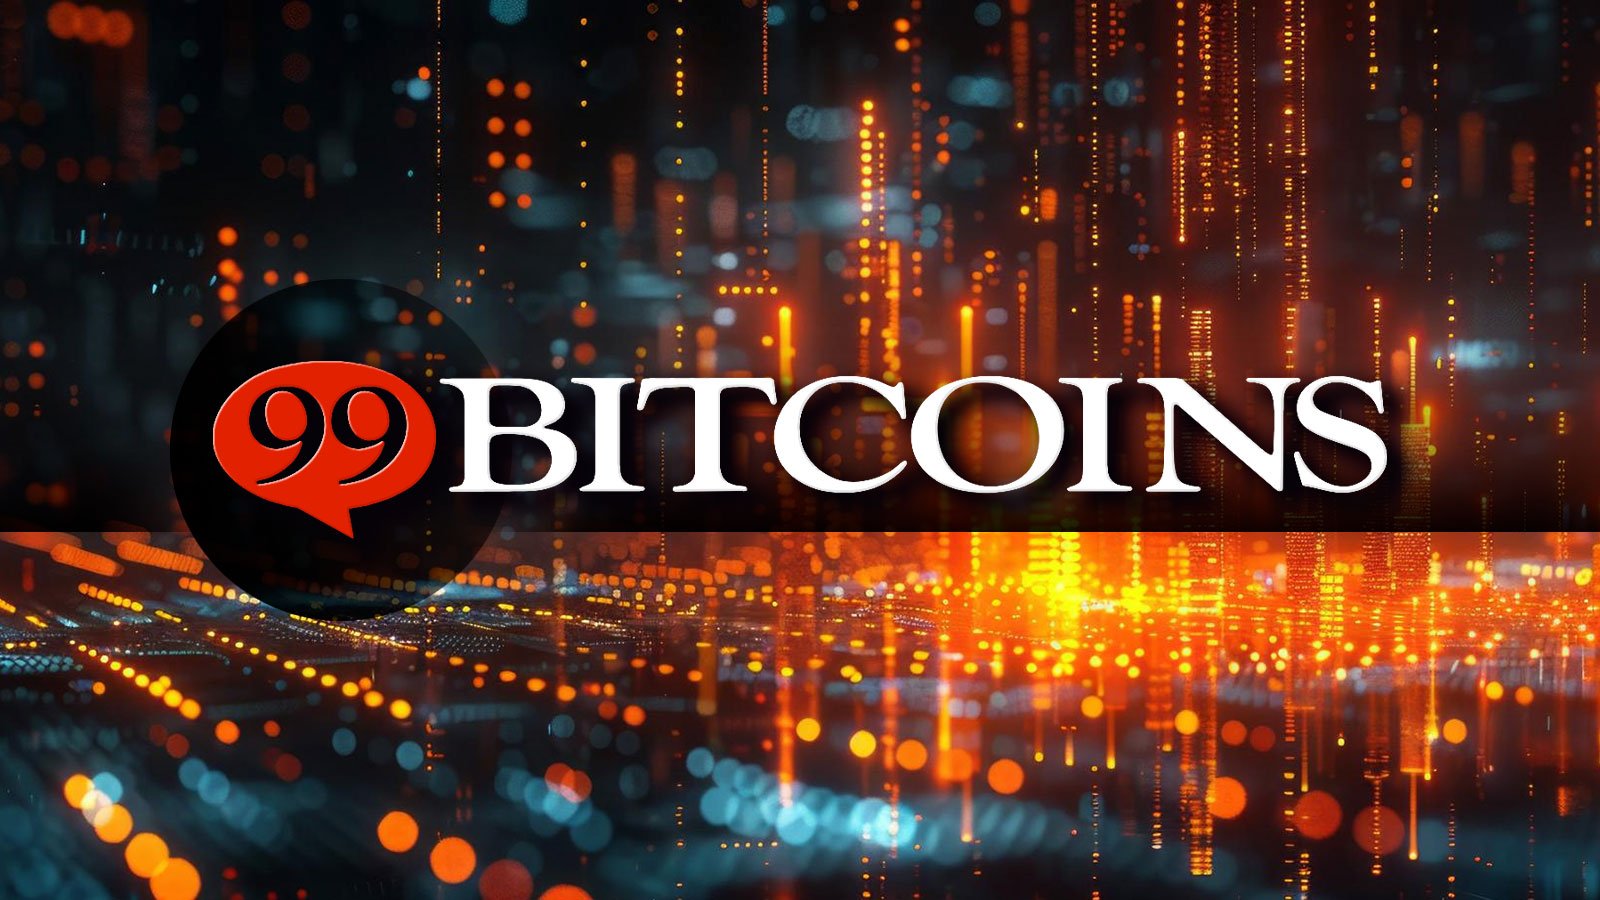 99Bitcoins Launches Presale – Learn-to-Earn Platform Raises $100,000 in a Flash